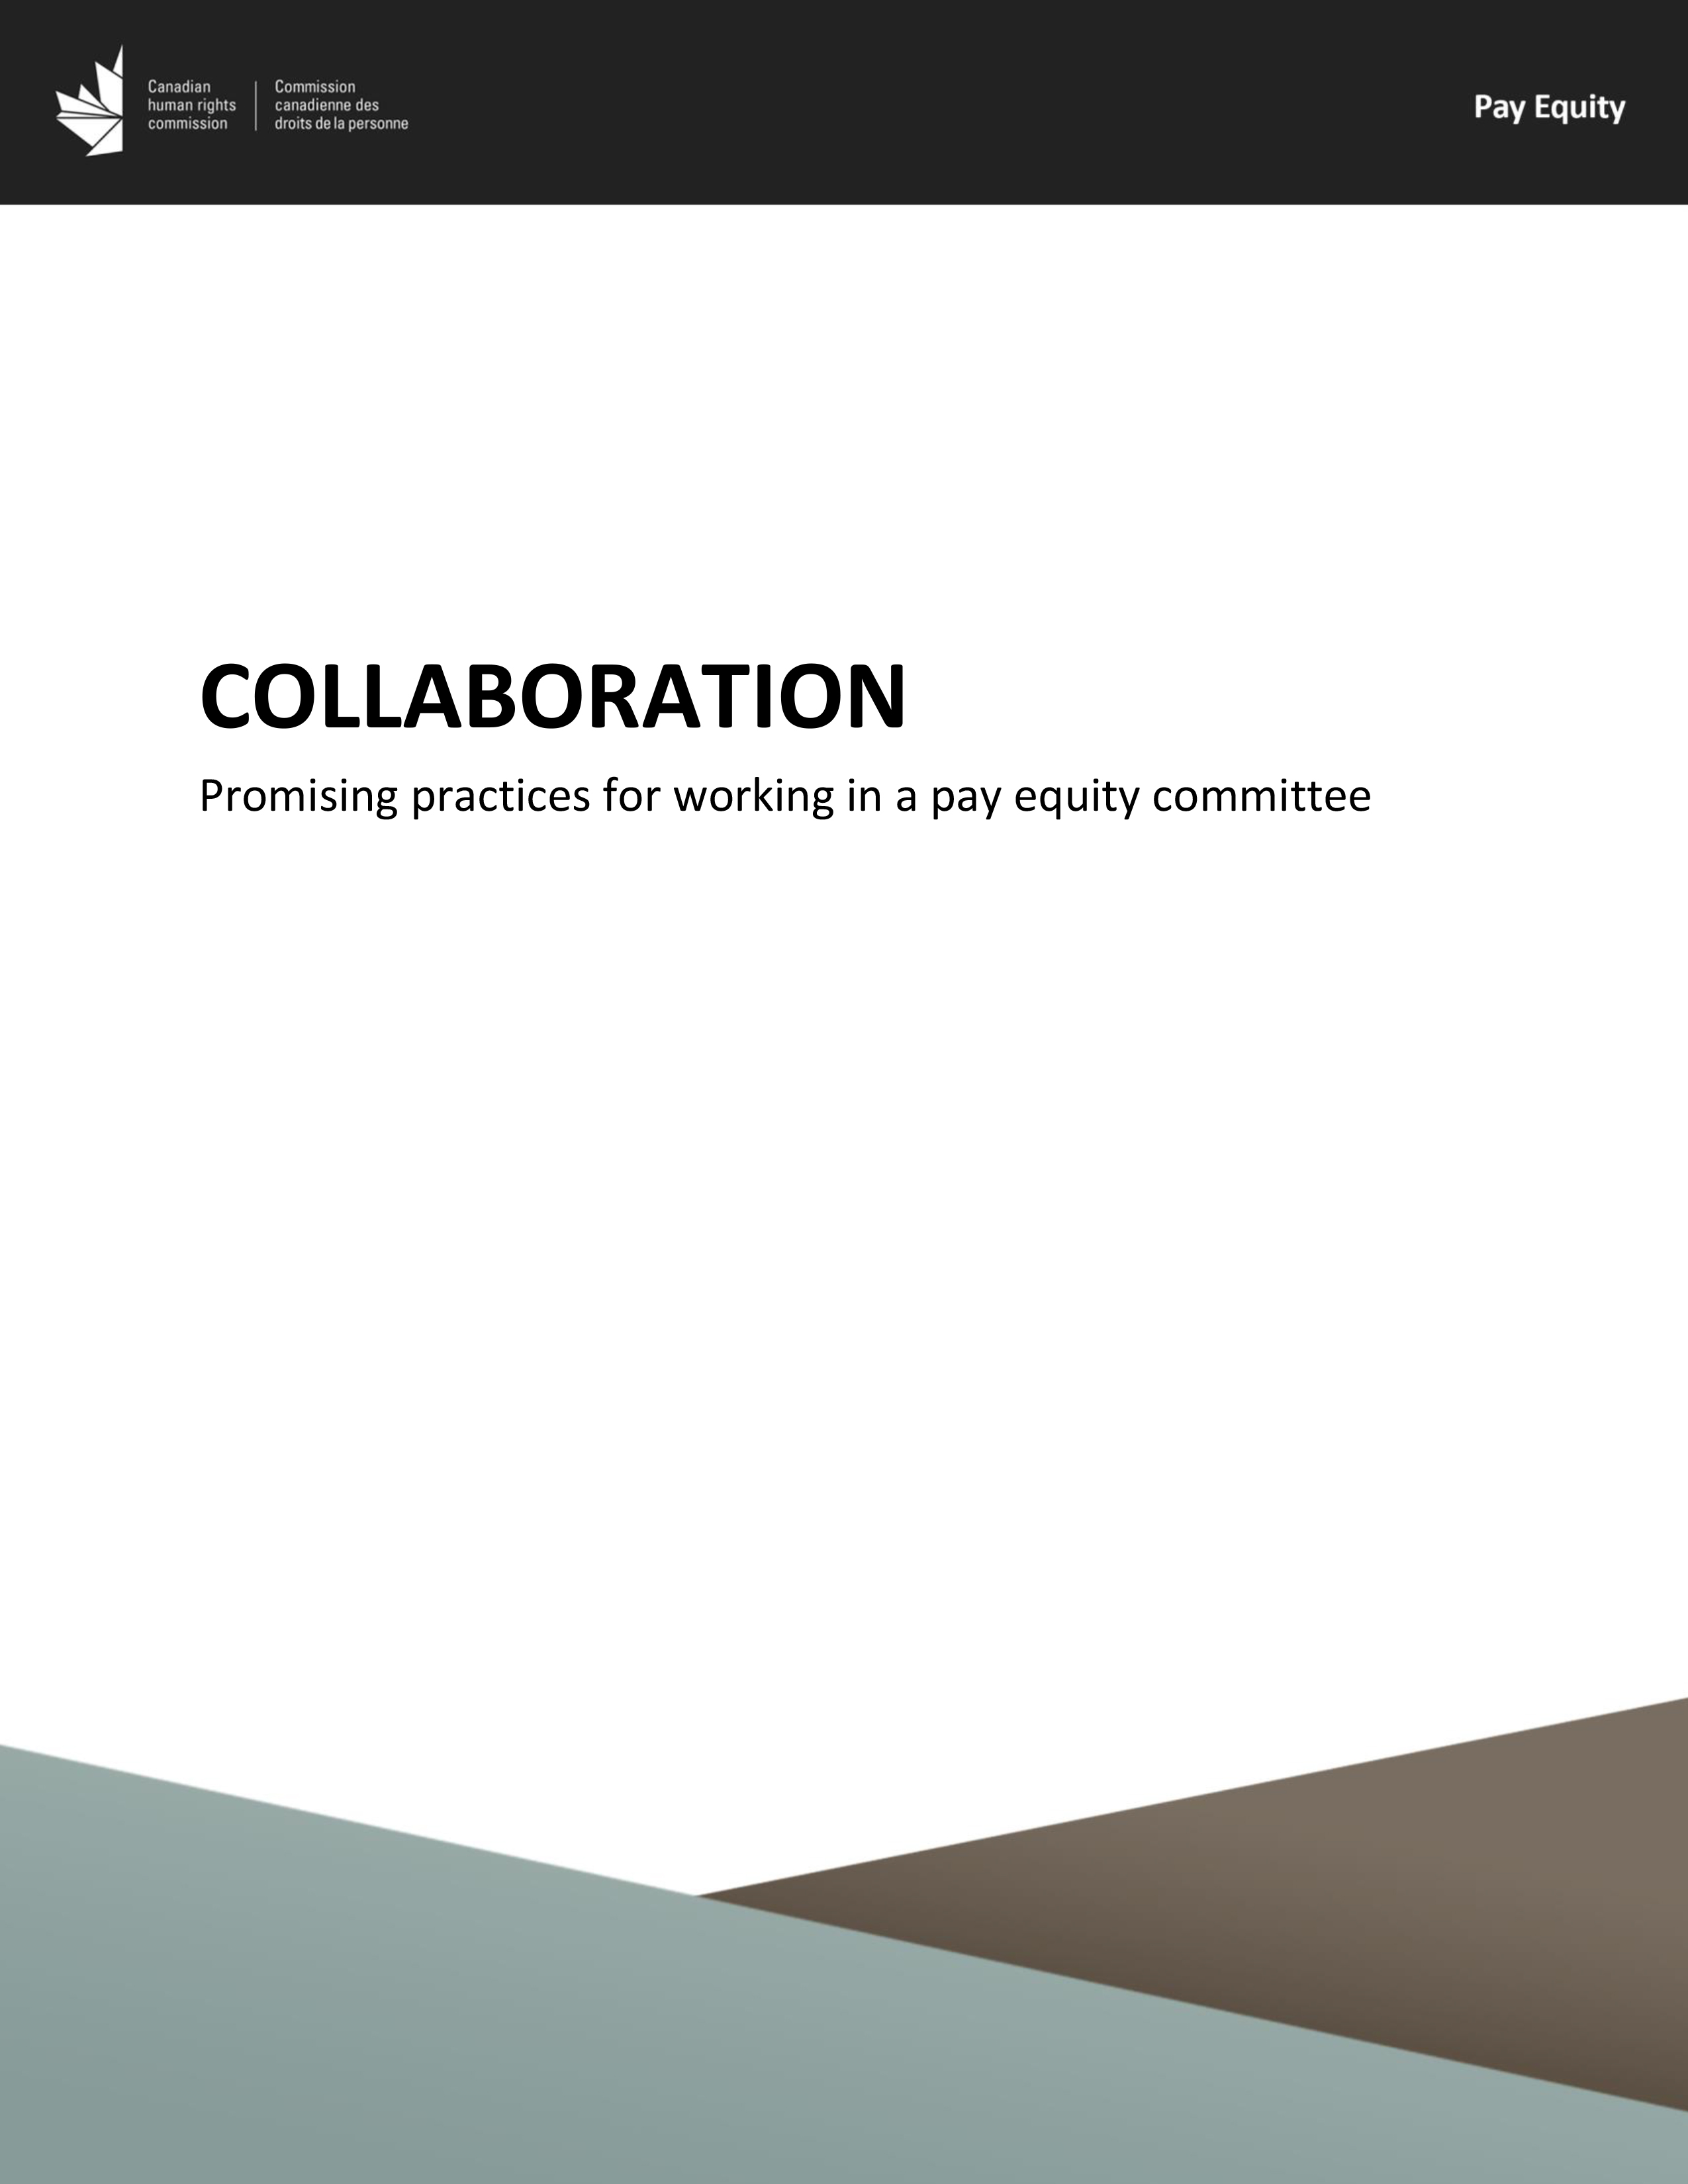 Promising practices for working in a pay equity committee – Collaboration